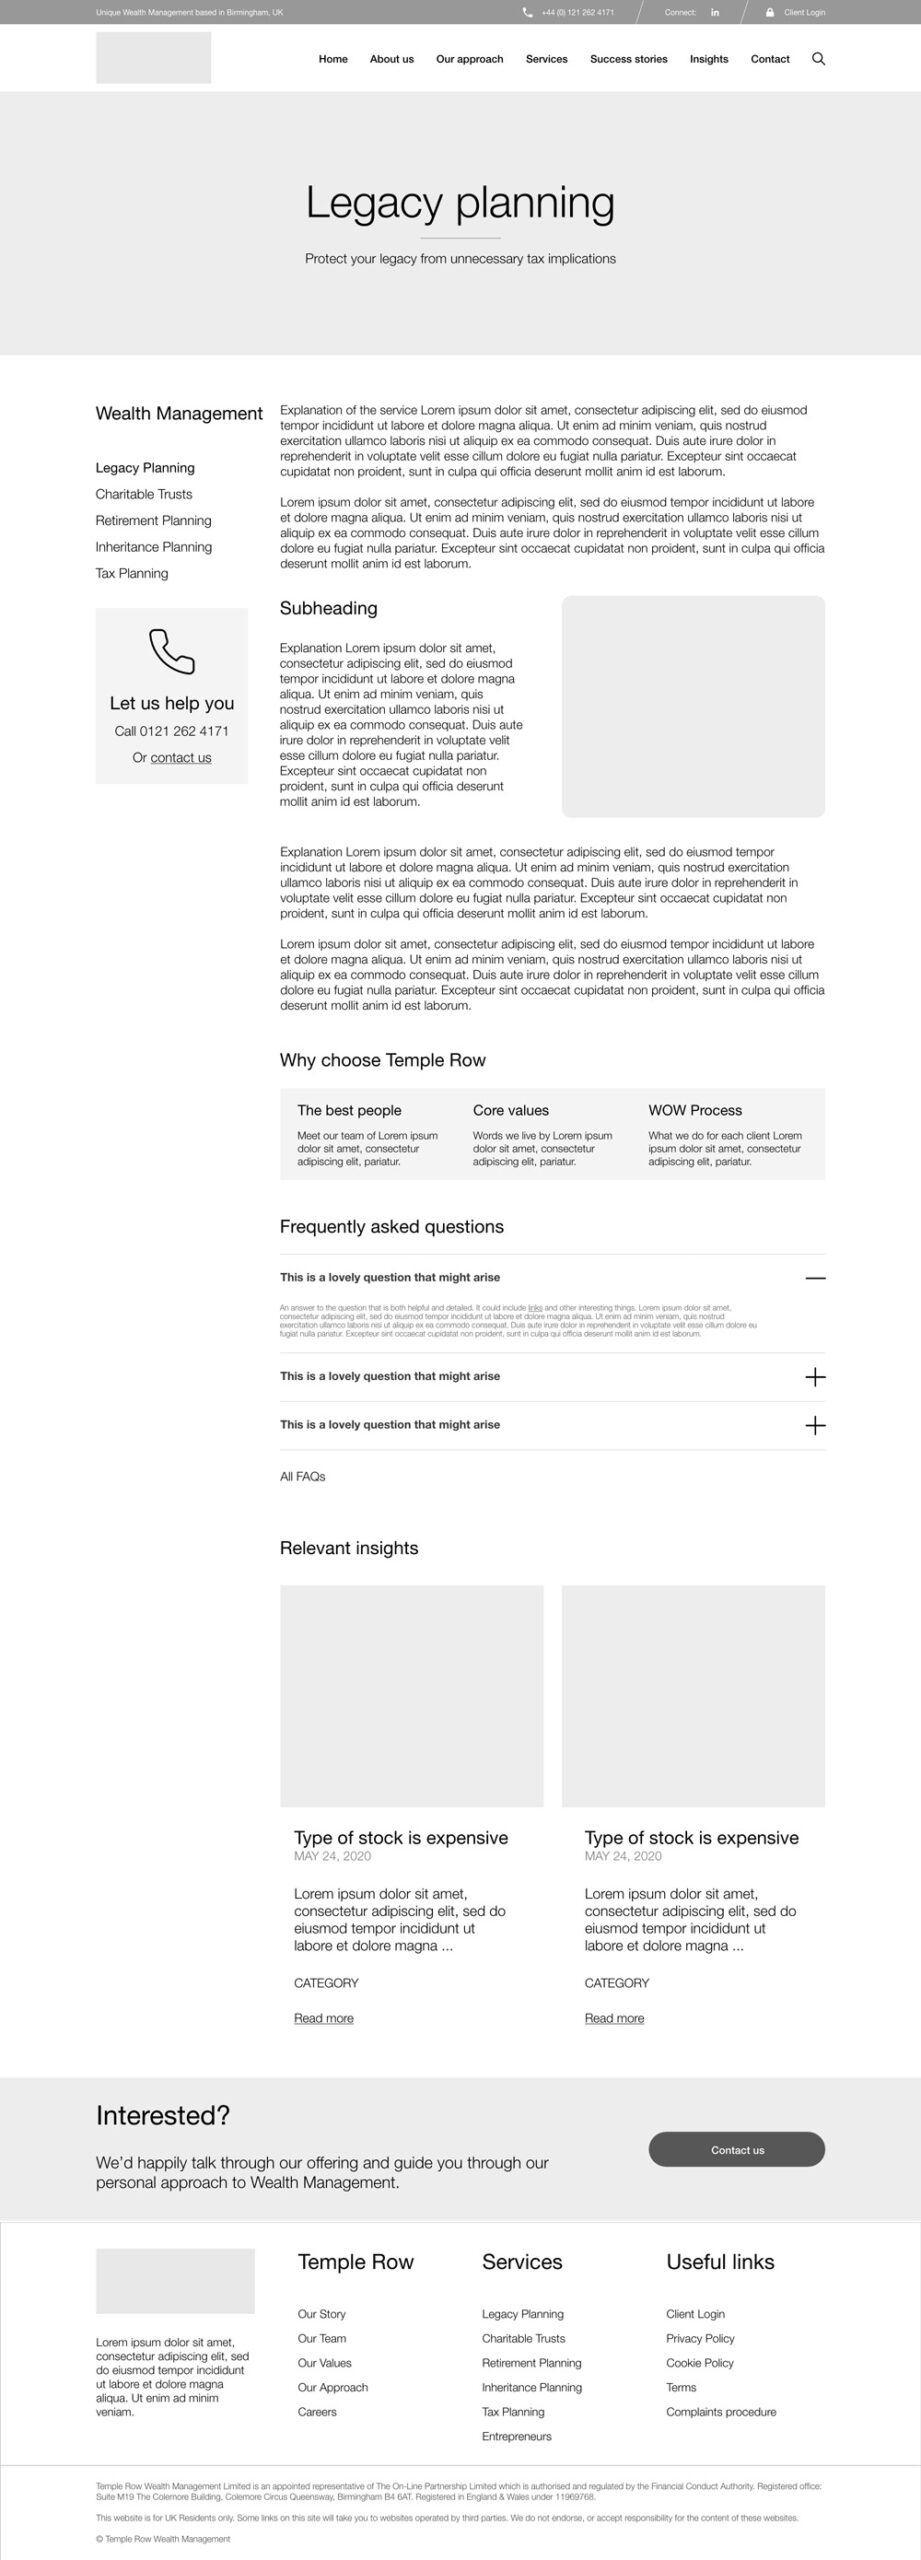 ethical-pixels-casestudy-temple-row-wealth-management-wireframe-14-service